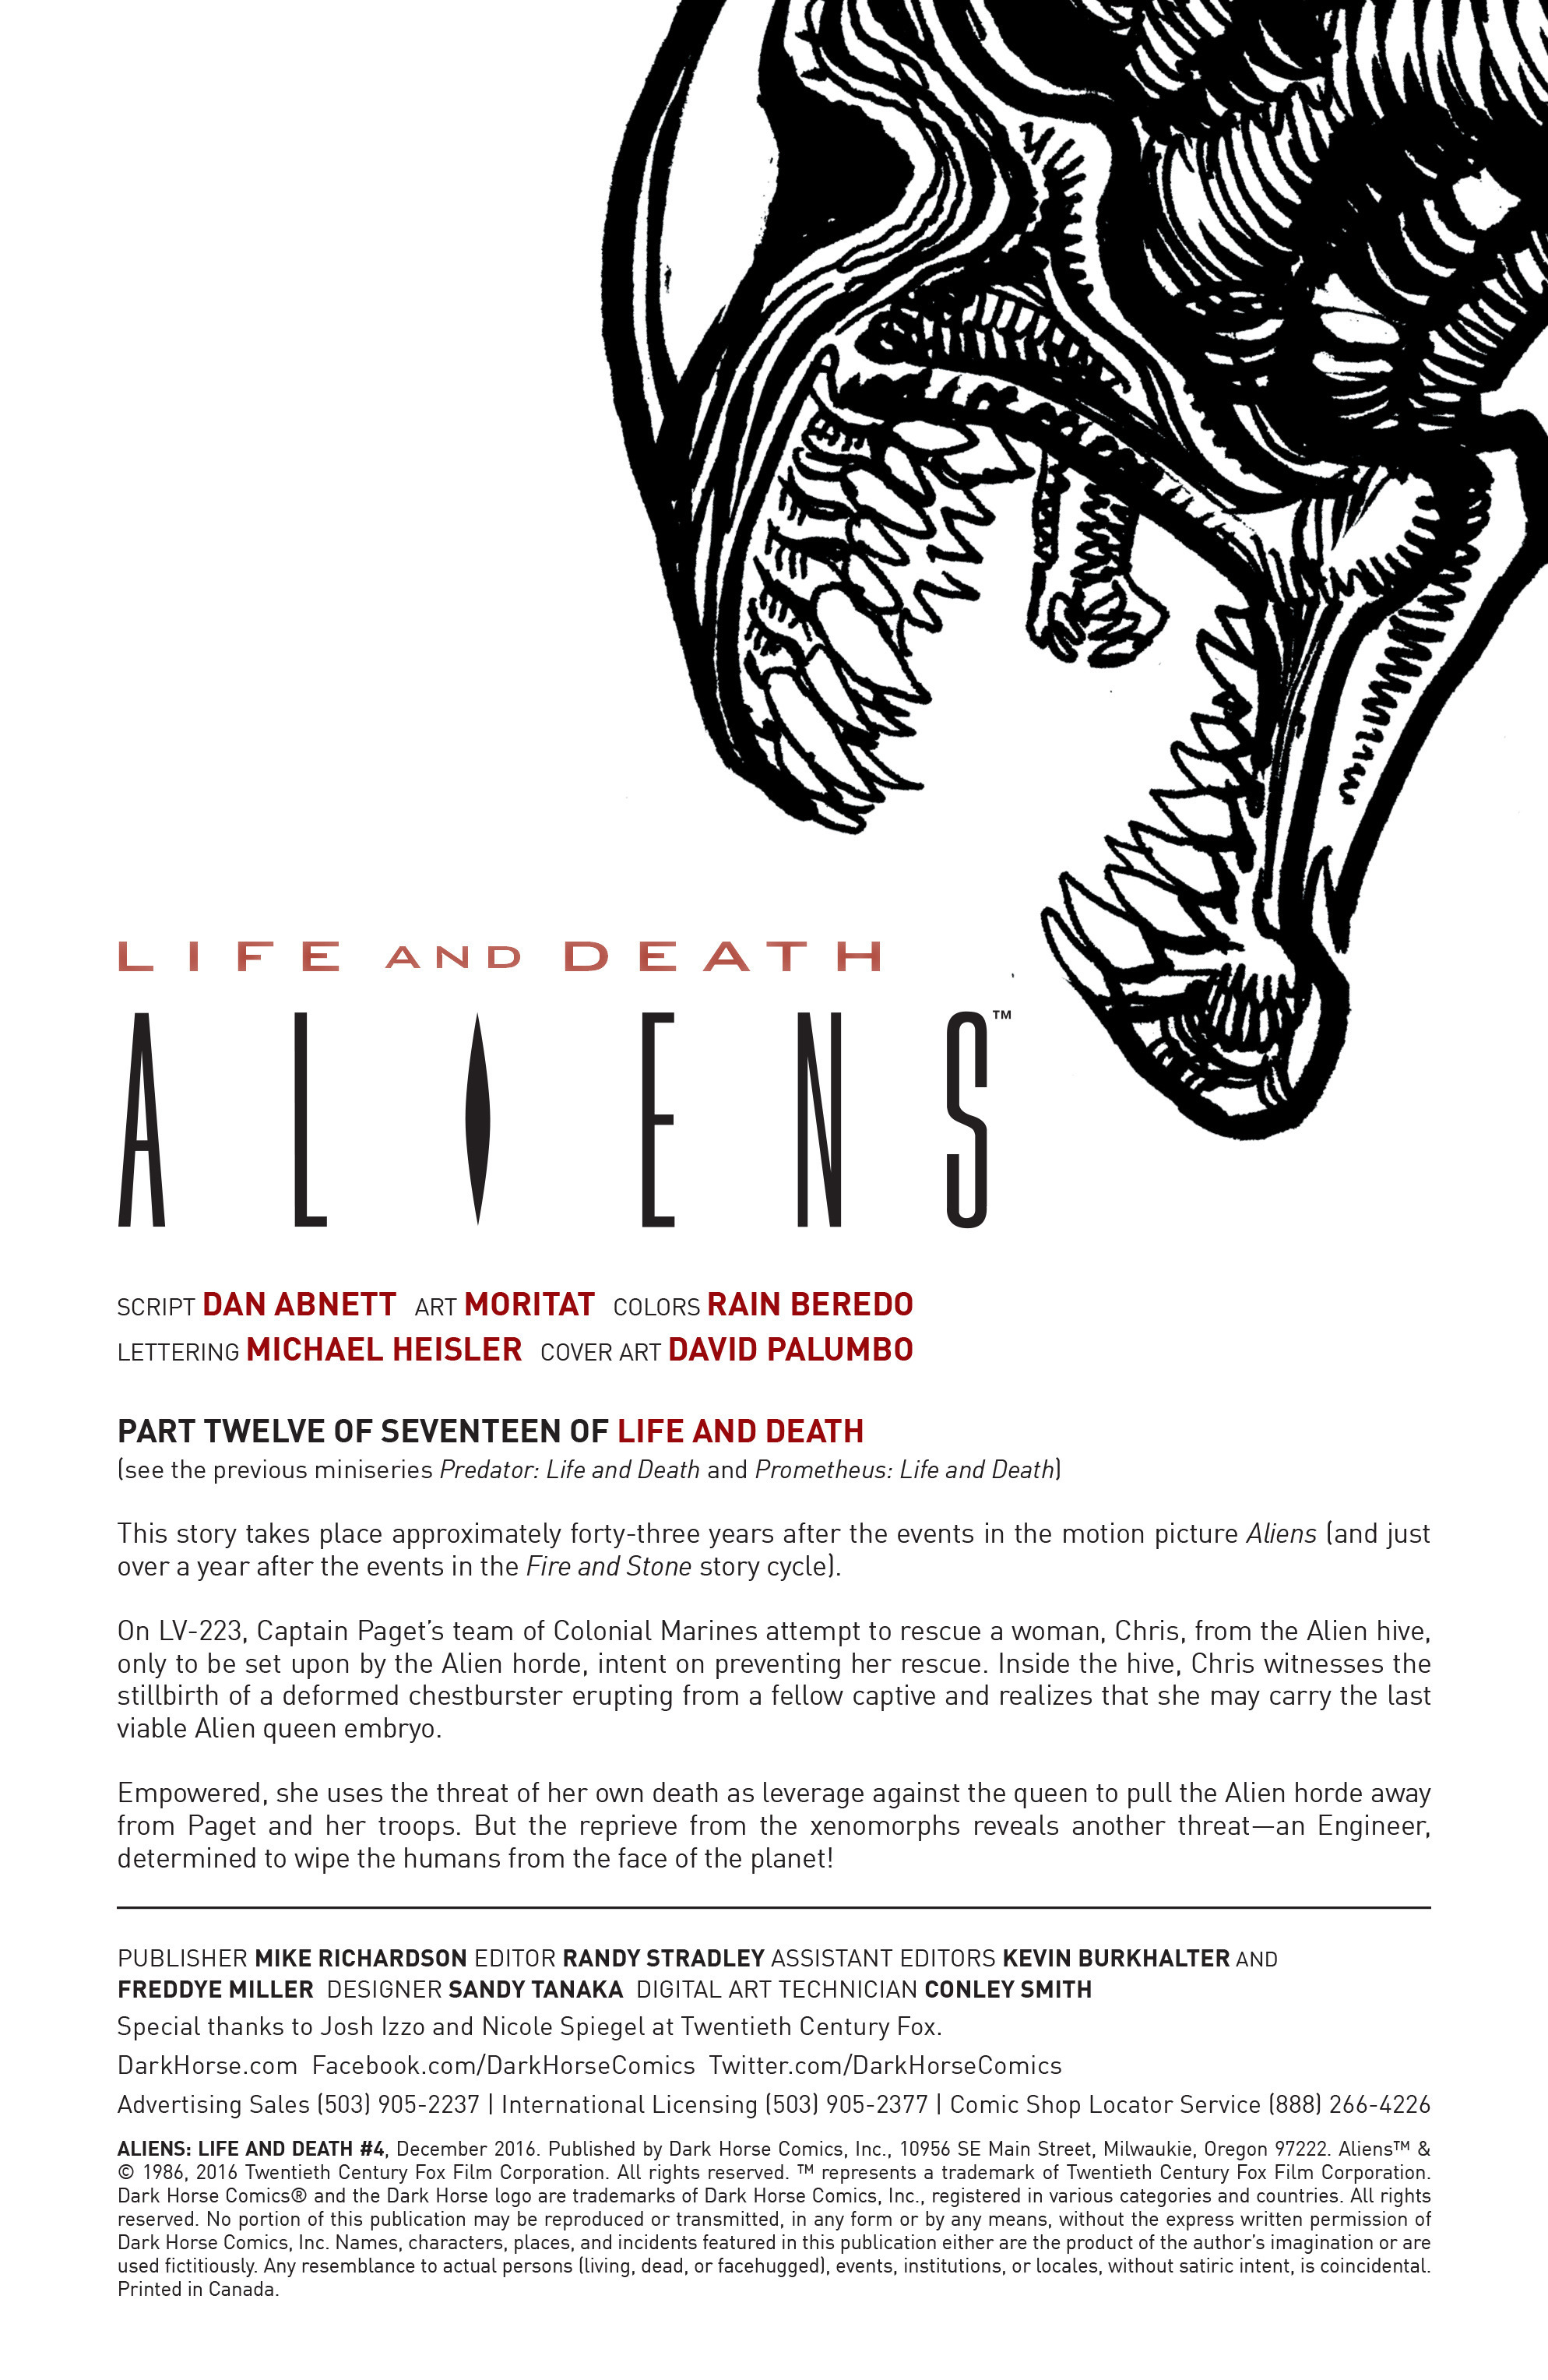 Read online Aliens: Life And Death comic -  Issue #4 - 2